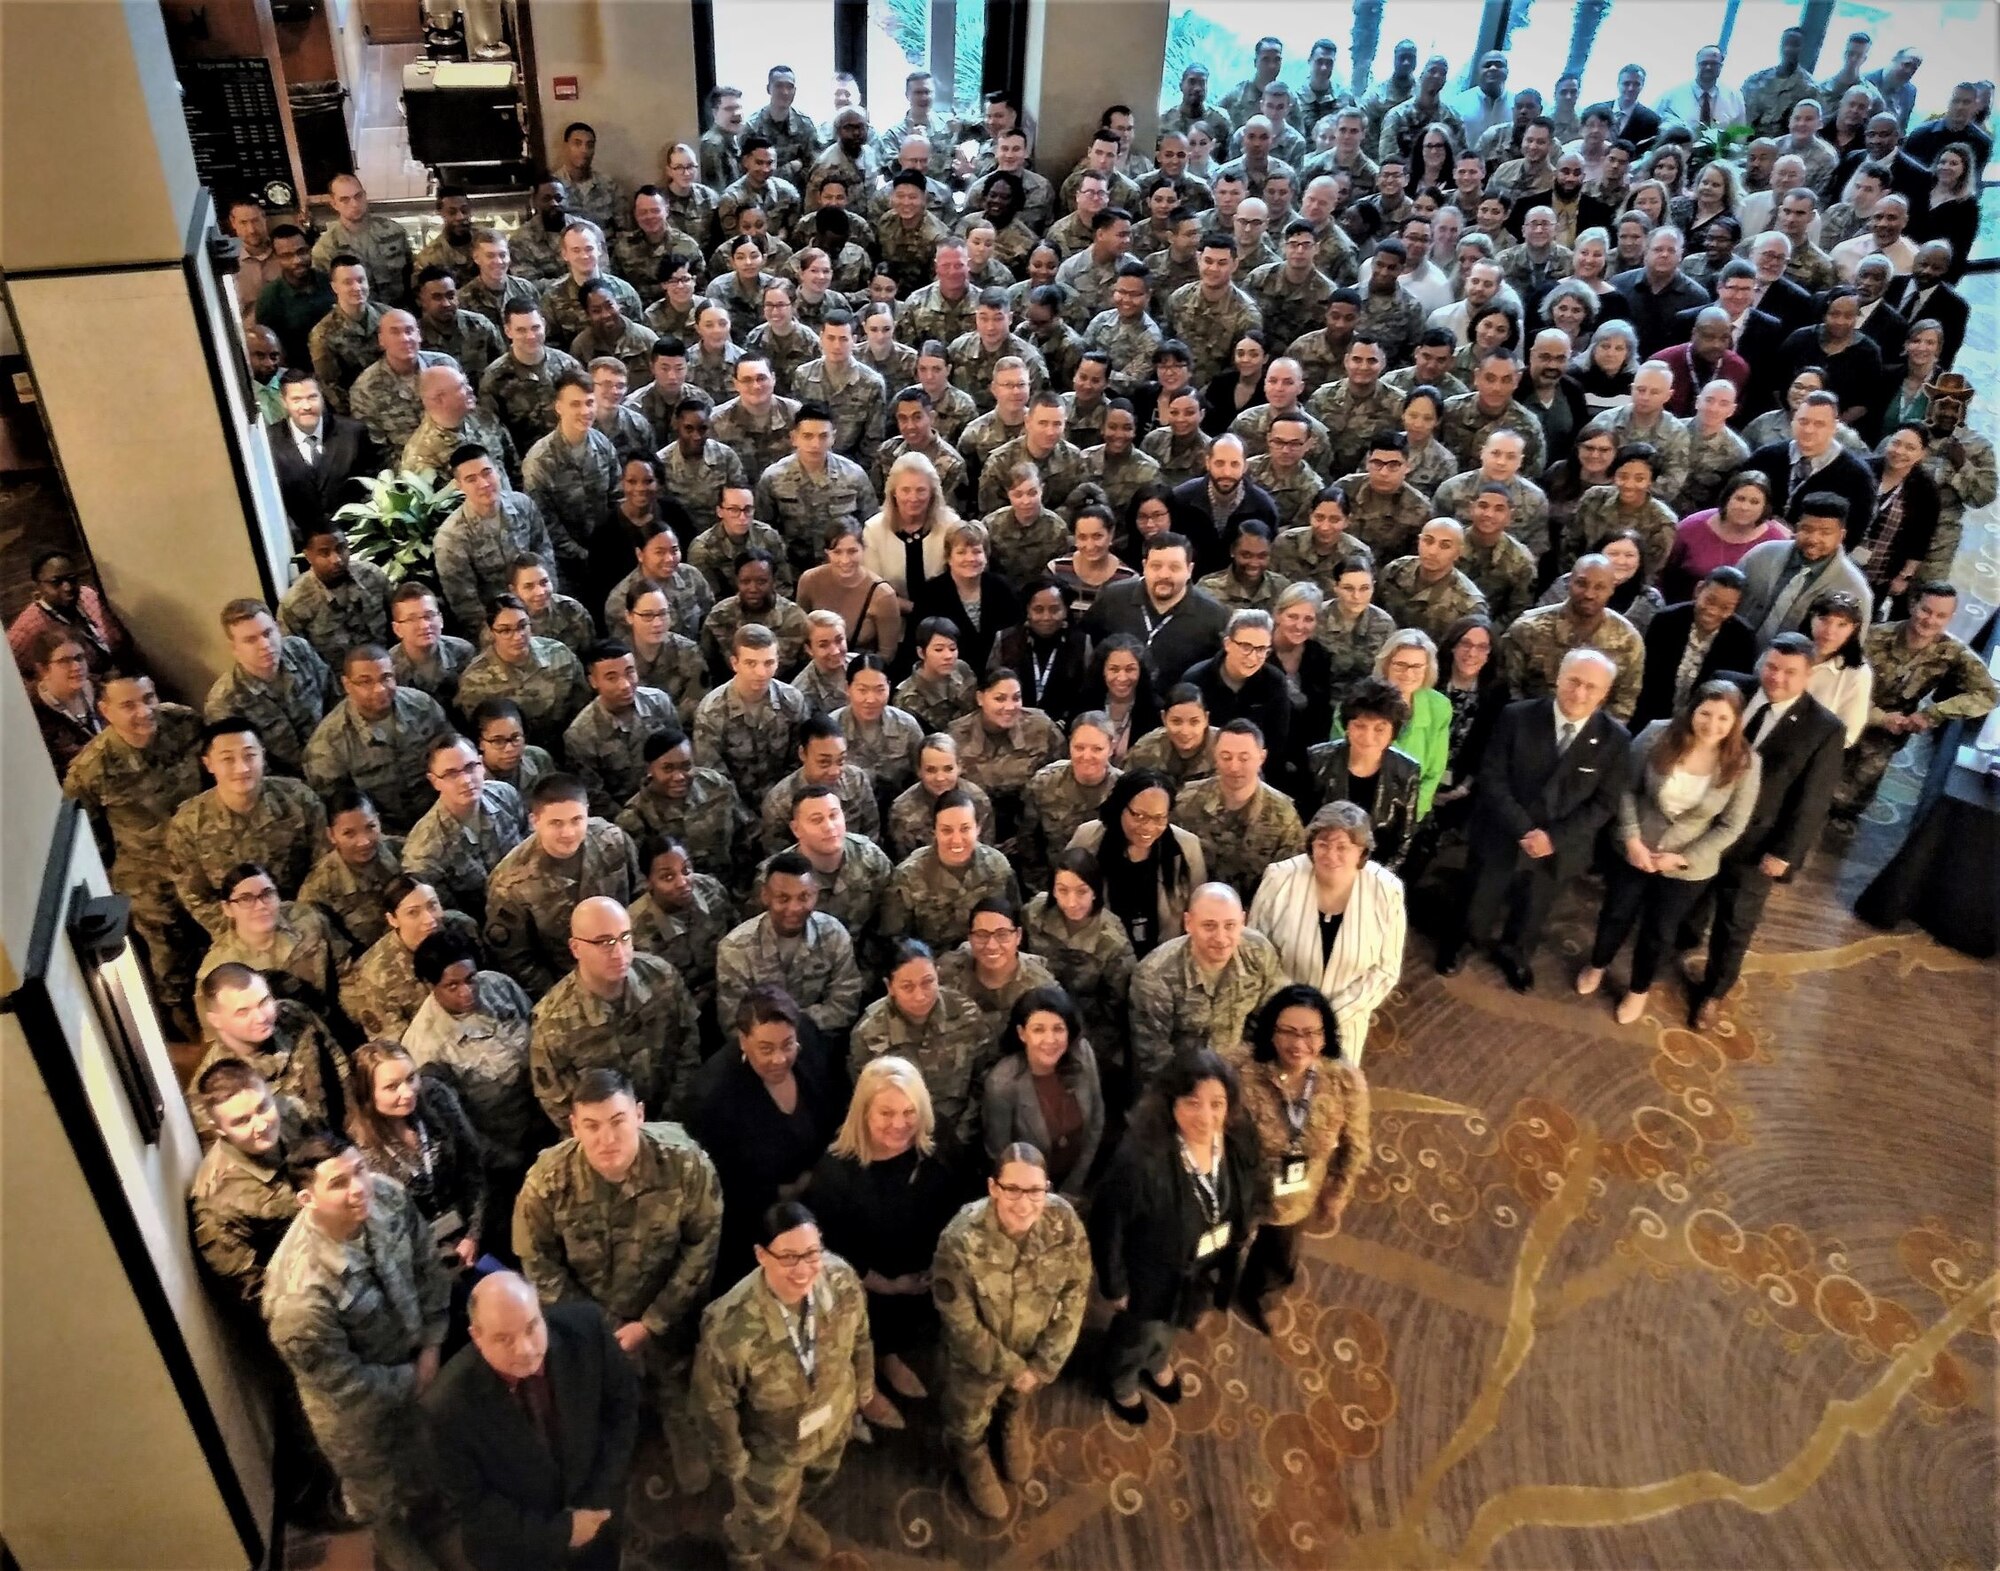 Approximately 300 military and civilian financial managers from Air Force installations around the world participated in AFIMSC’s third annual Air Force Financial Operations conference Feb. 11-13 in San Antonio.